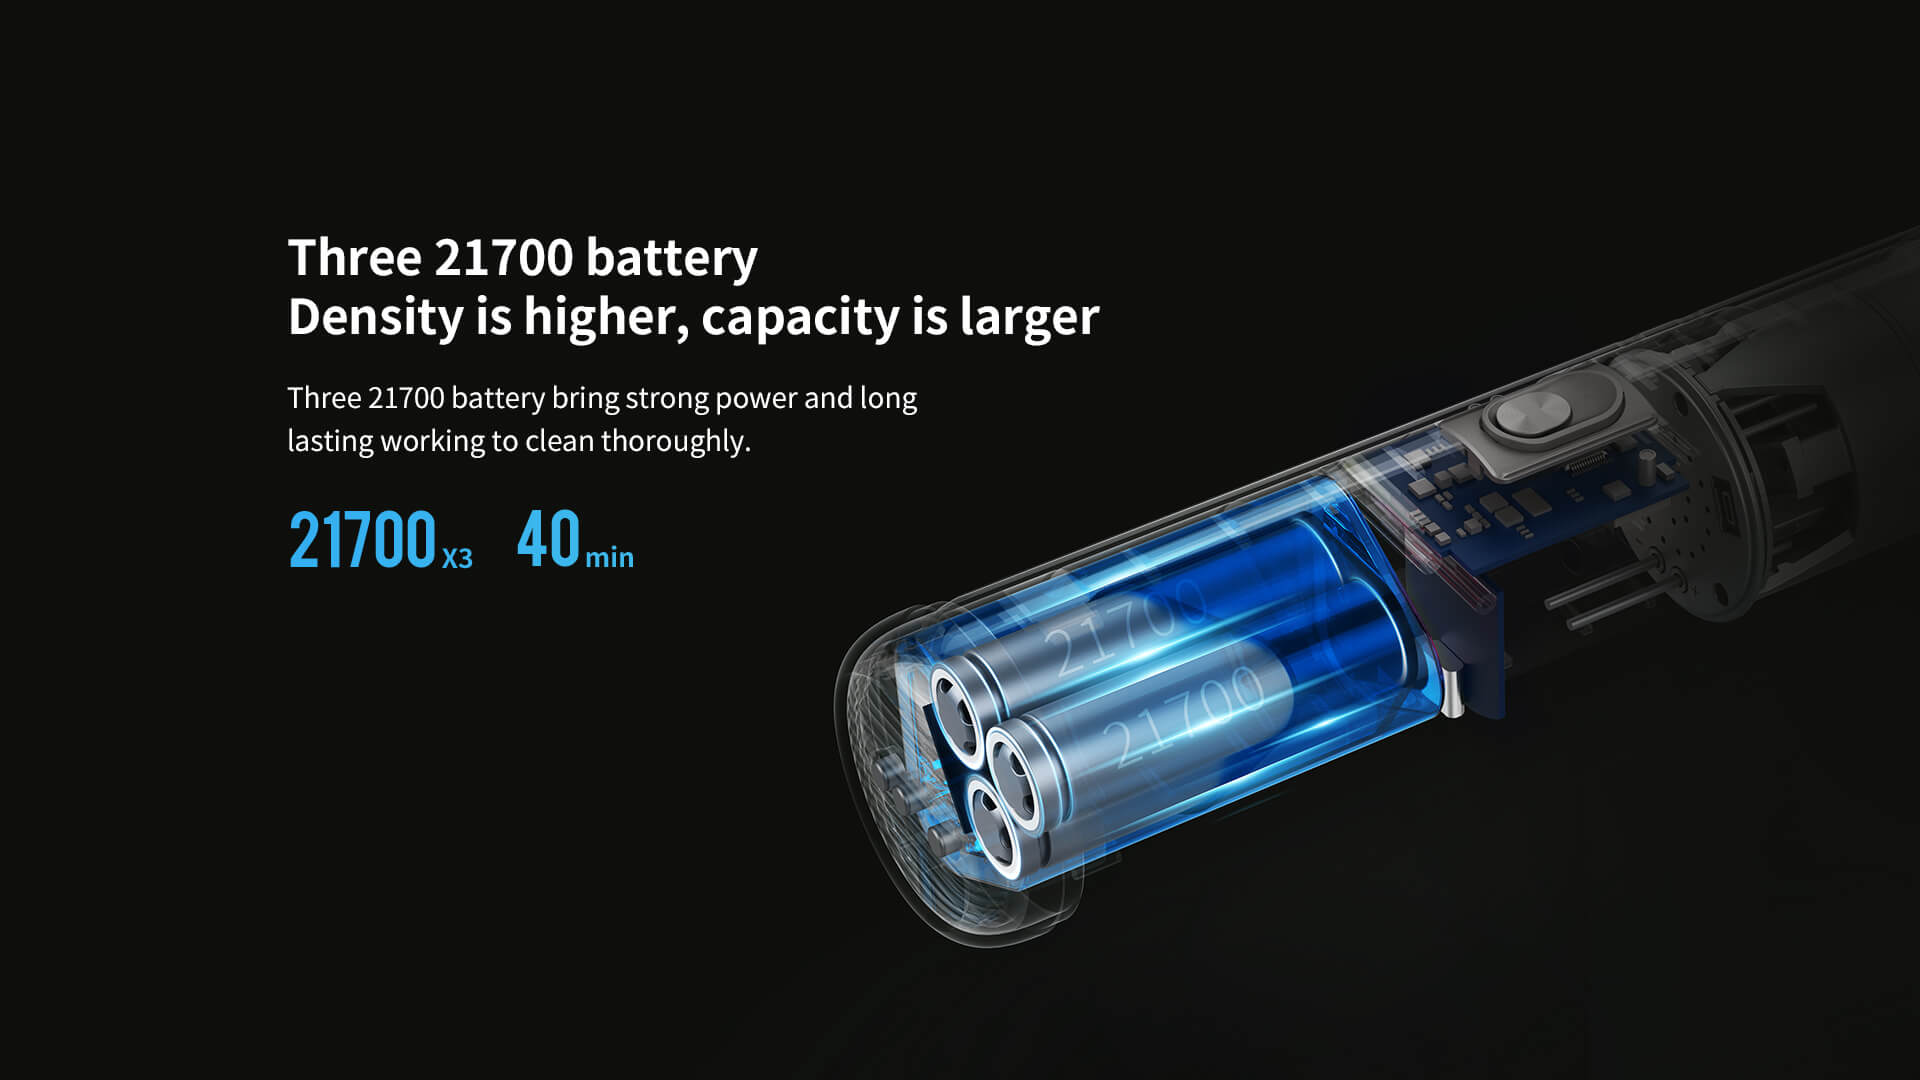 Three 21700 battery density is hight, capacity is larger, bring strong power and long lasting working to clean thoroughly.